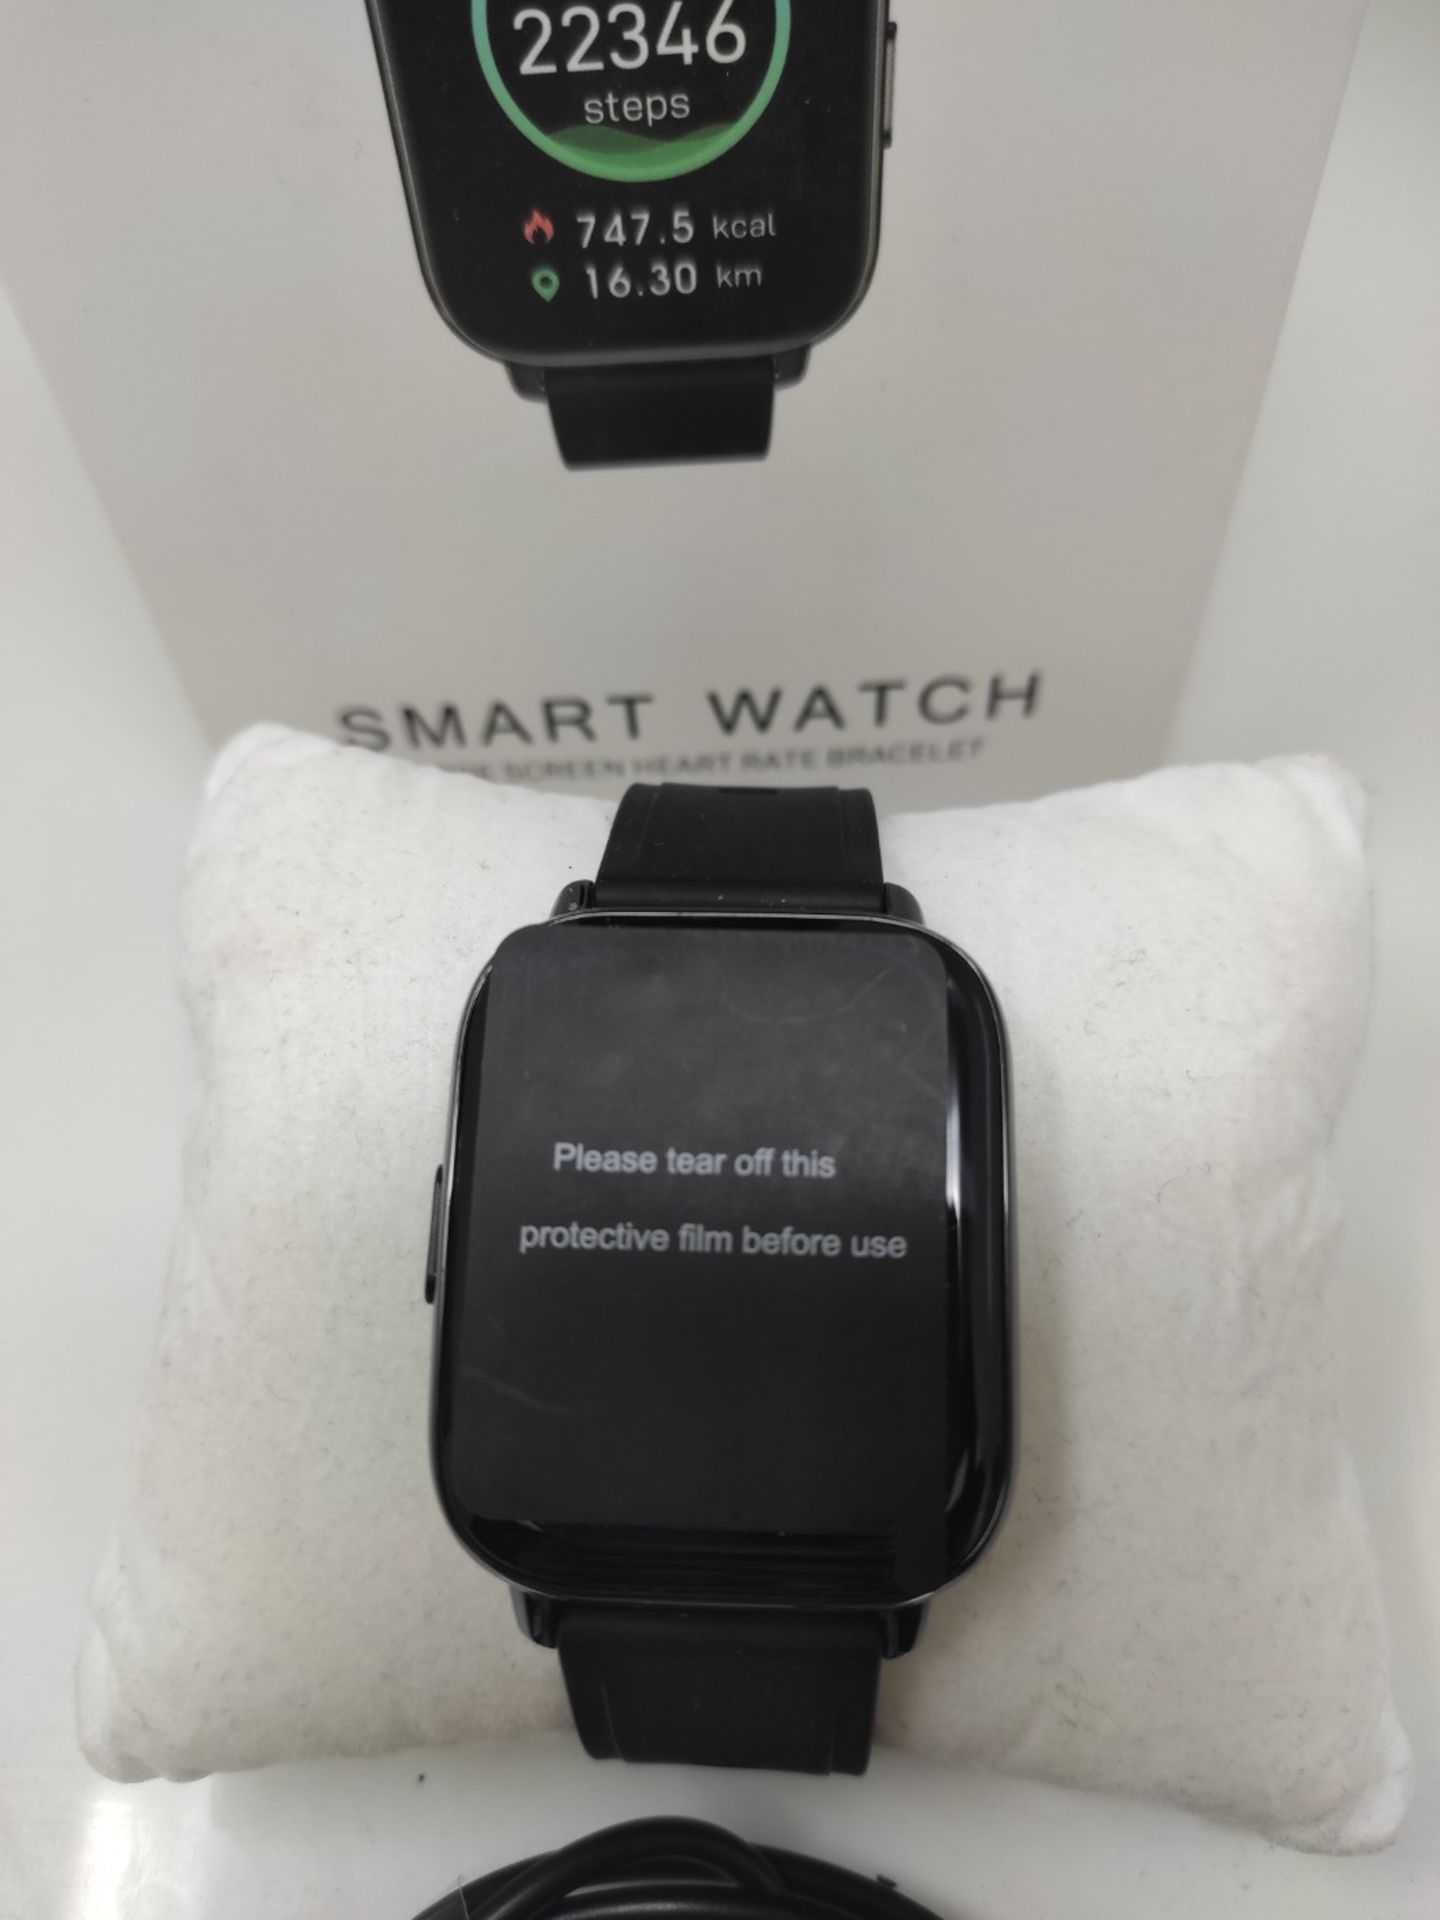 Smart Watch, 1.69 Inch Fitness Tracker, Activity Tracker with Sleep Heart Rate Monitor - Image 3 of 3